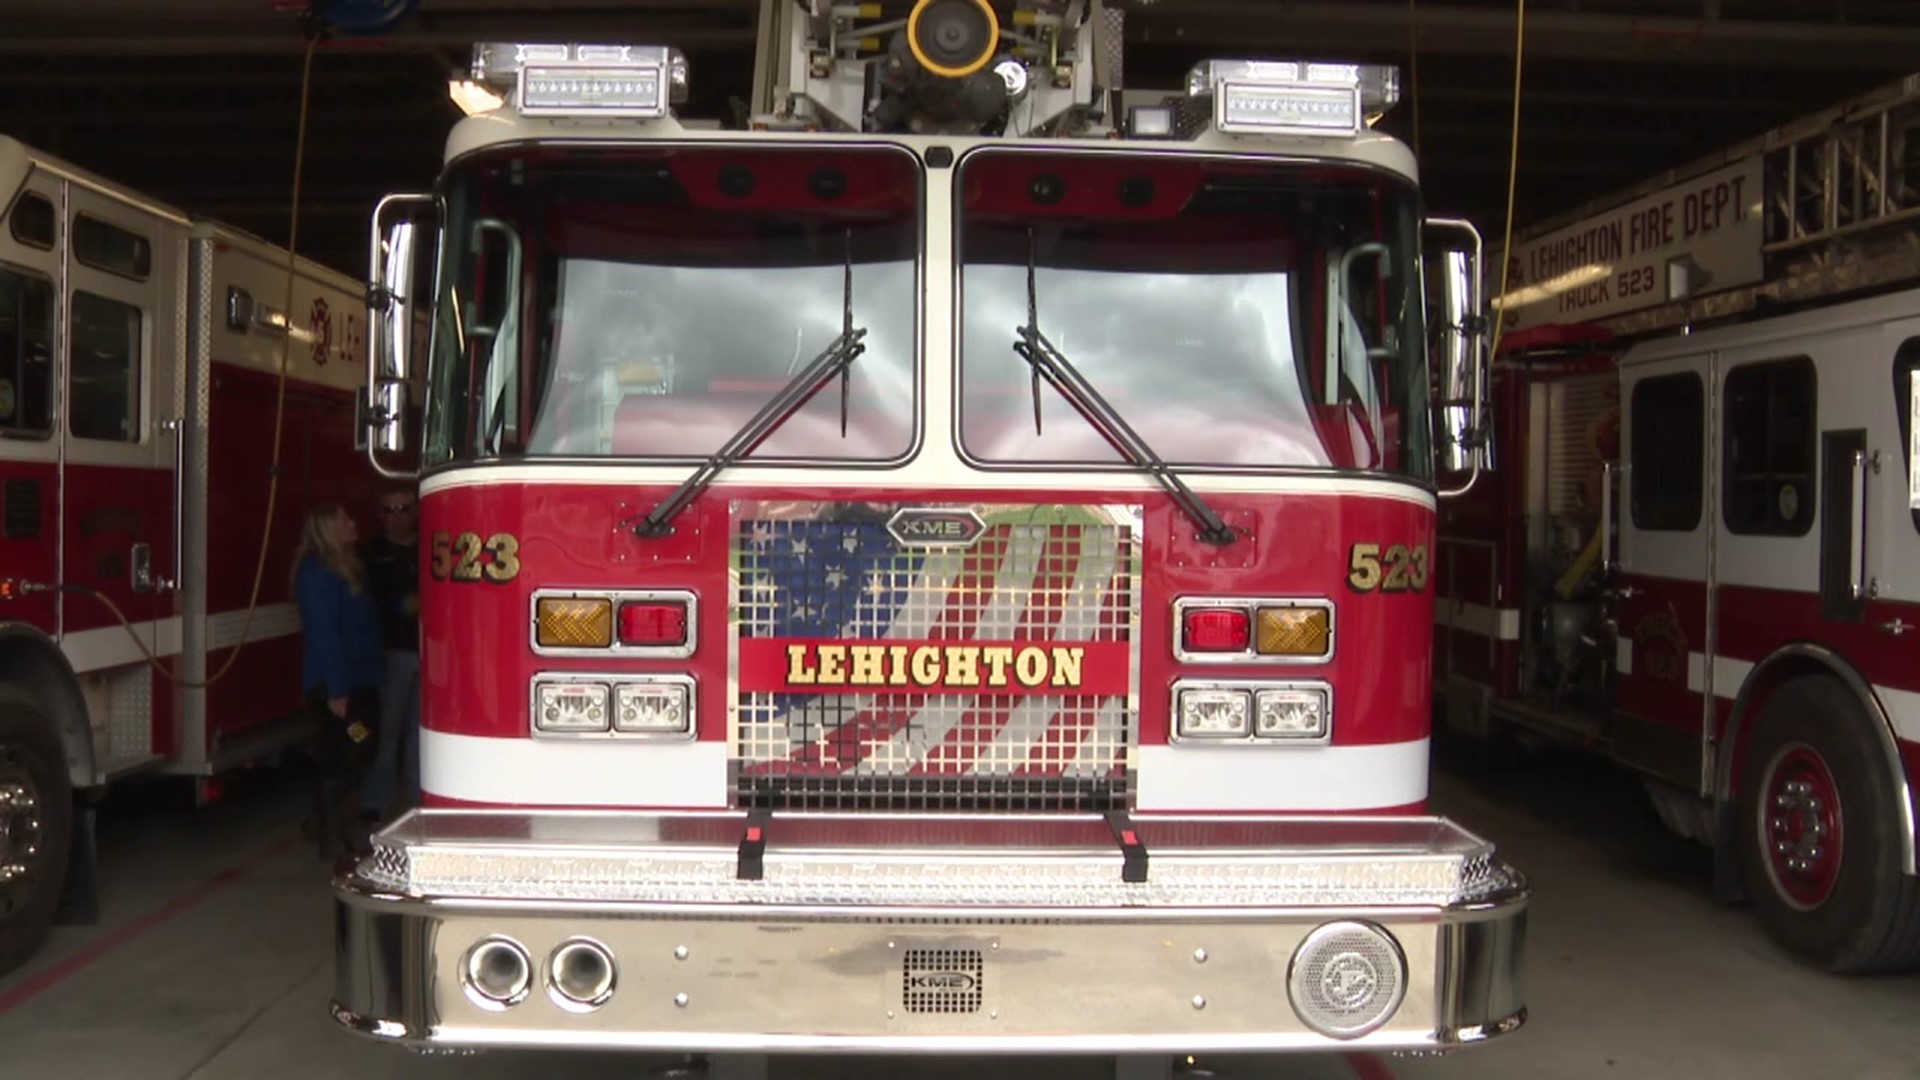 The last truck to roll off the assembly line will stay close to home with the Lehighton Fire Department.